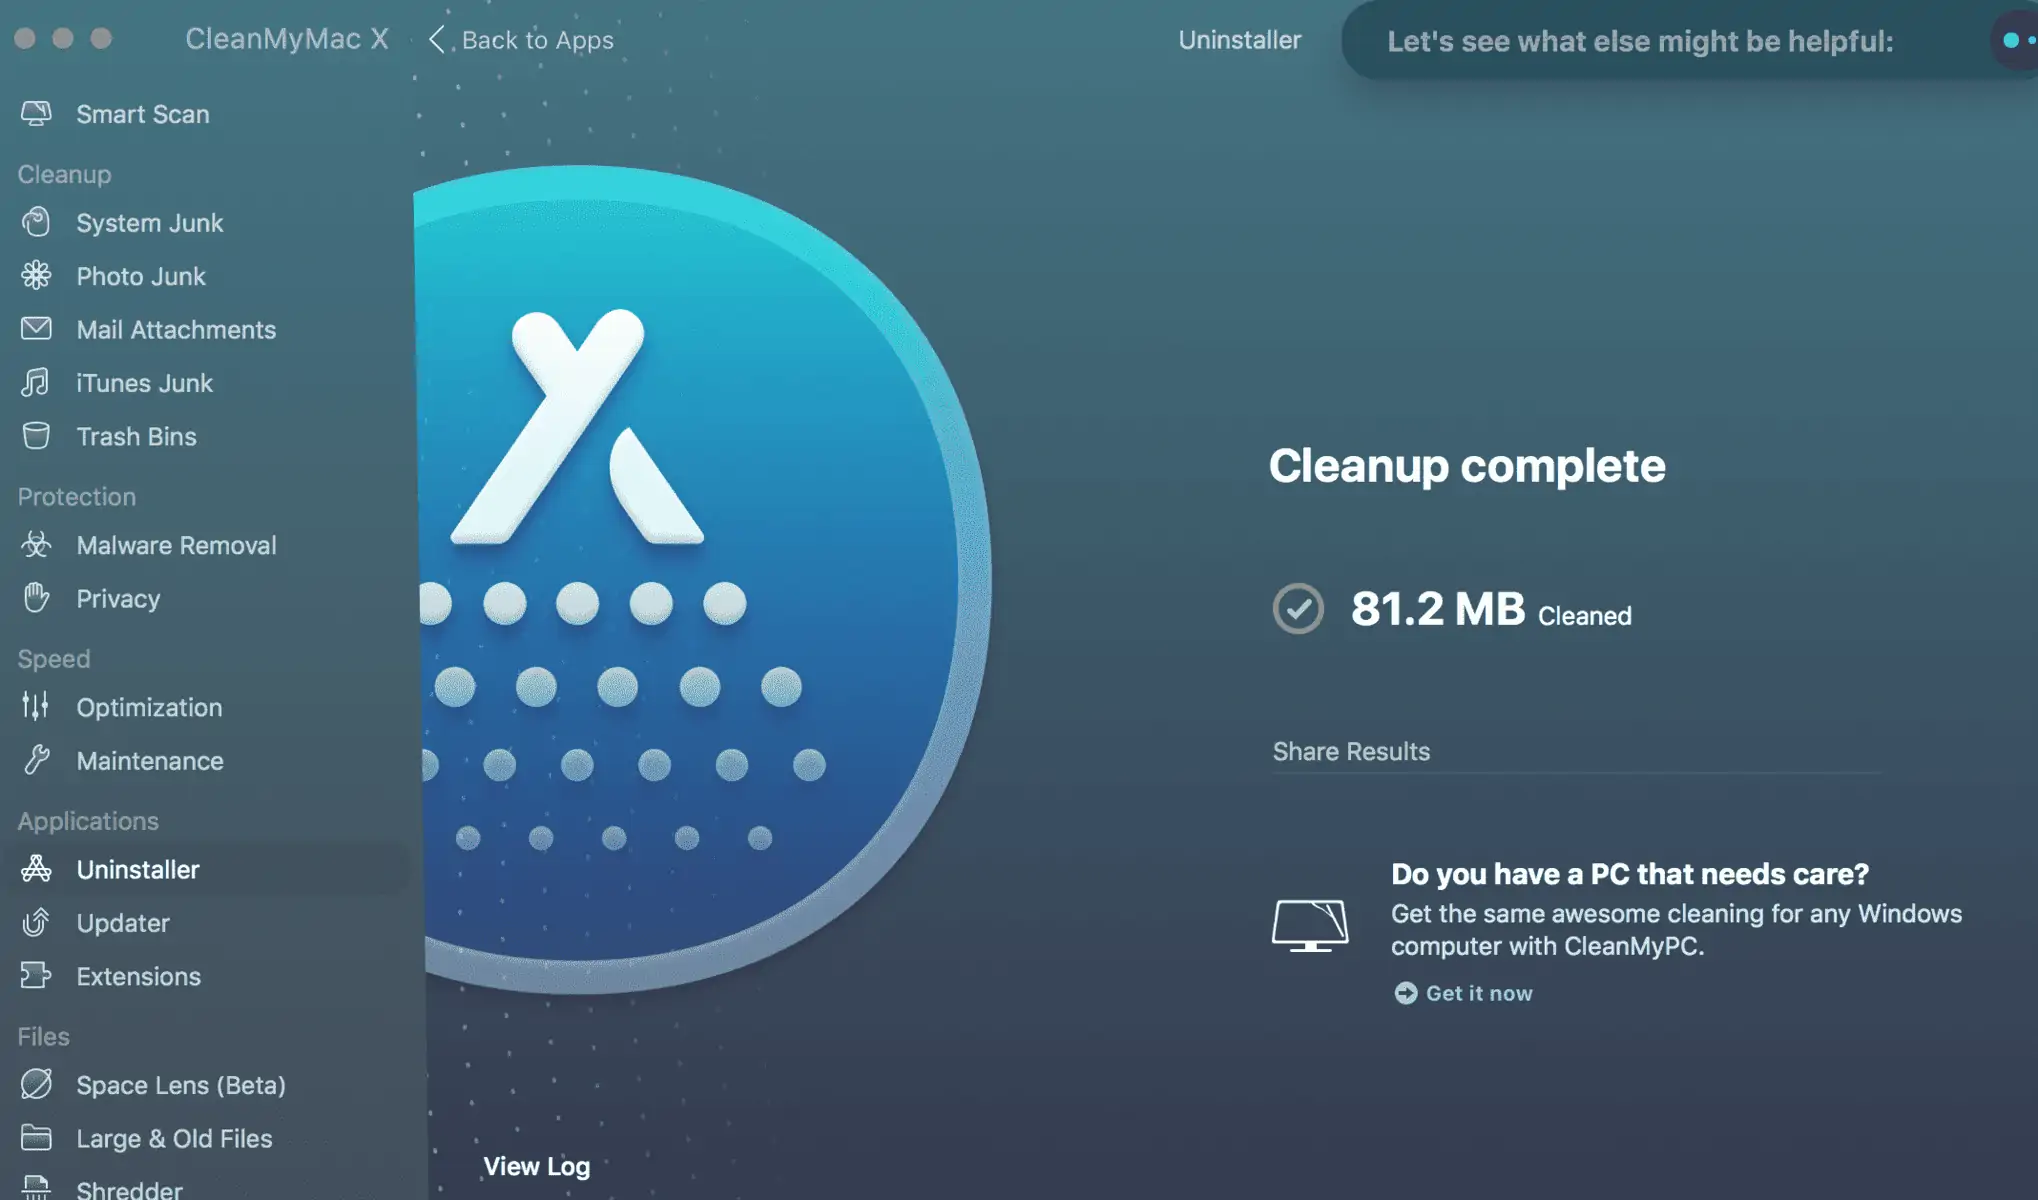 app cleanup complete screen in cleanmymac.